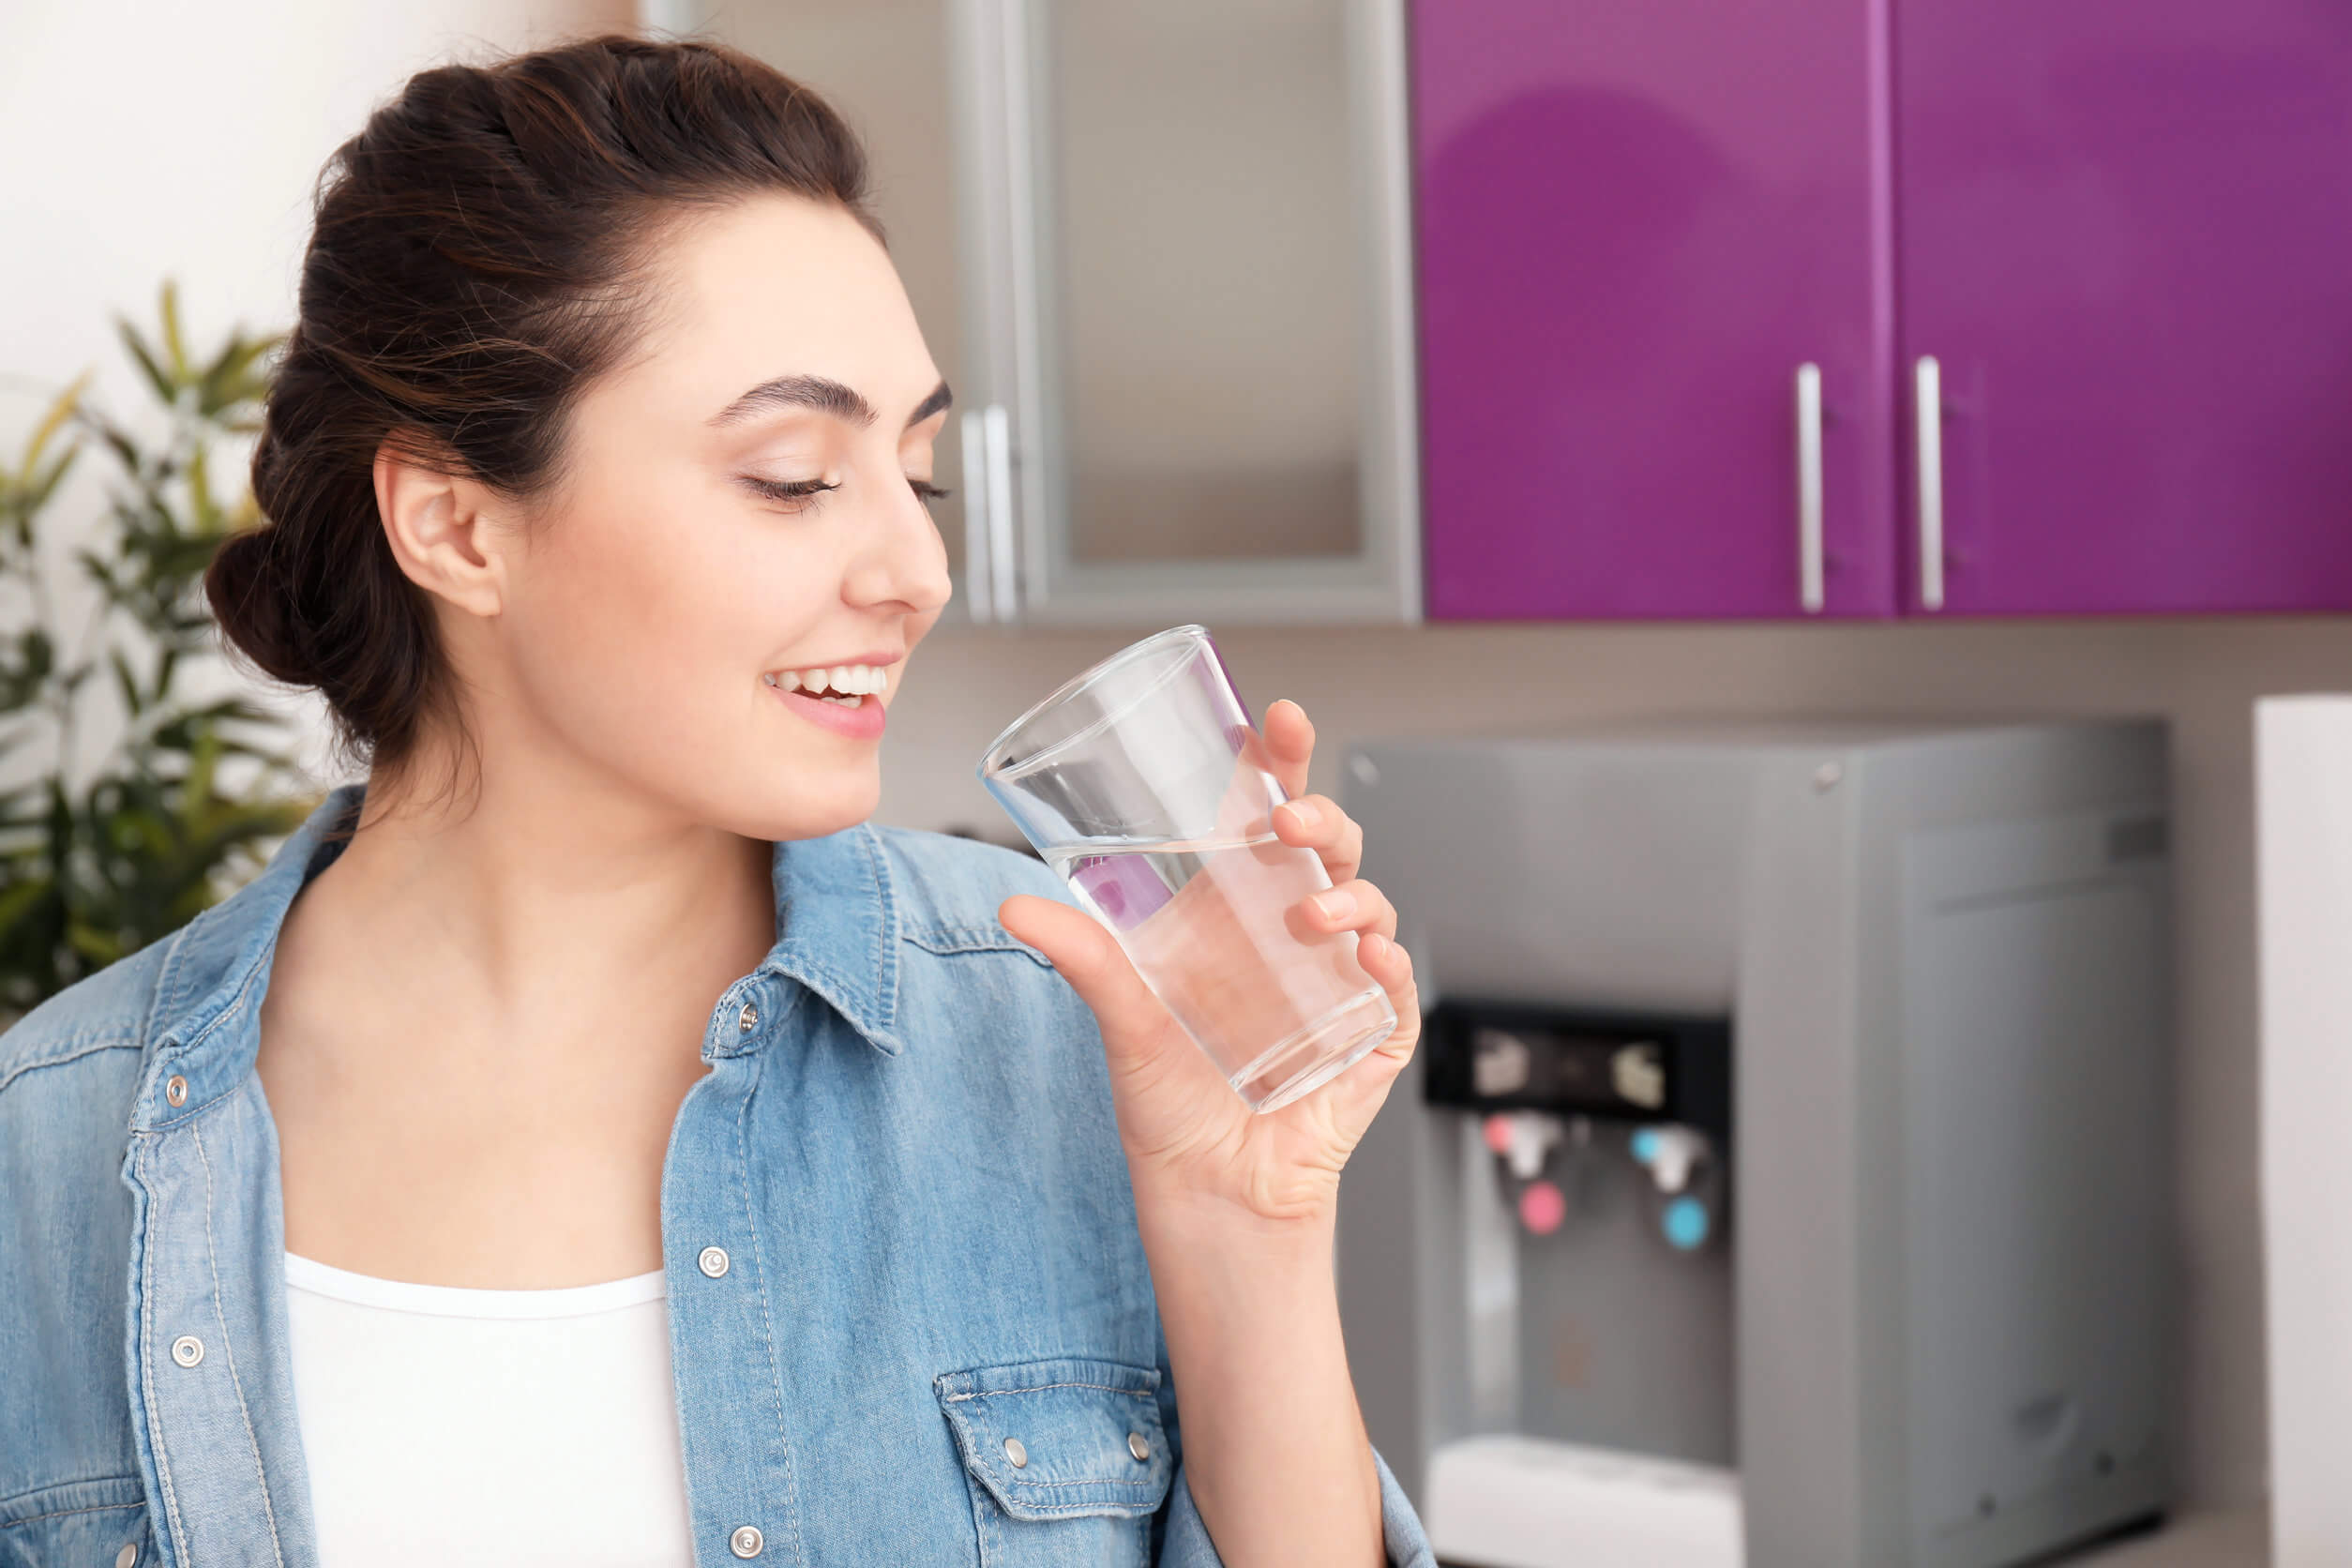 Going without drinking water is bad for your health.